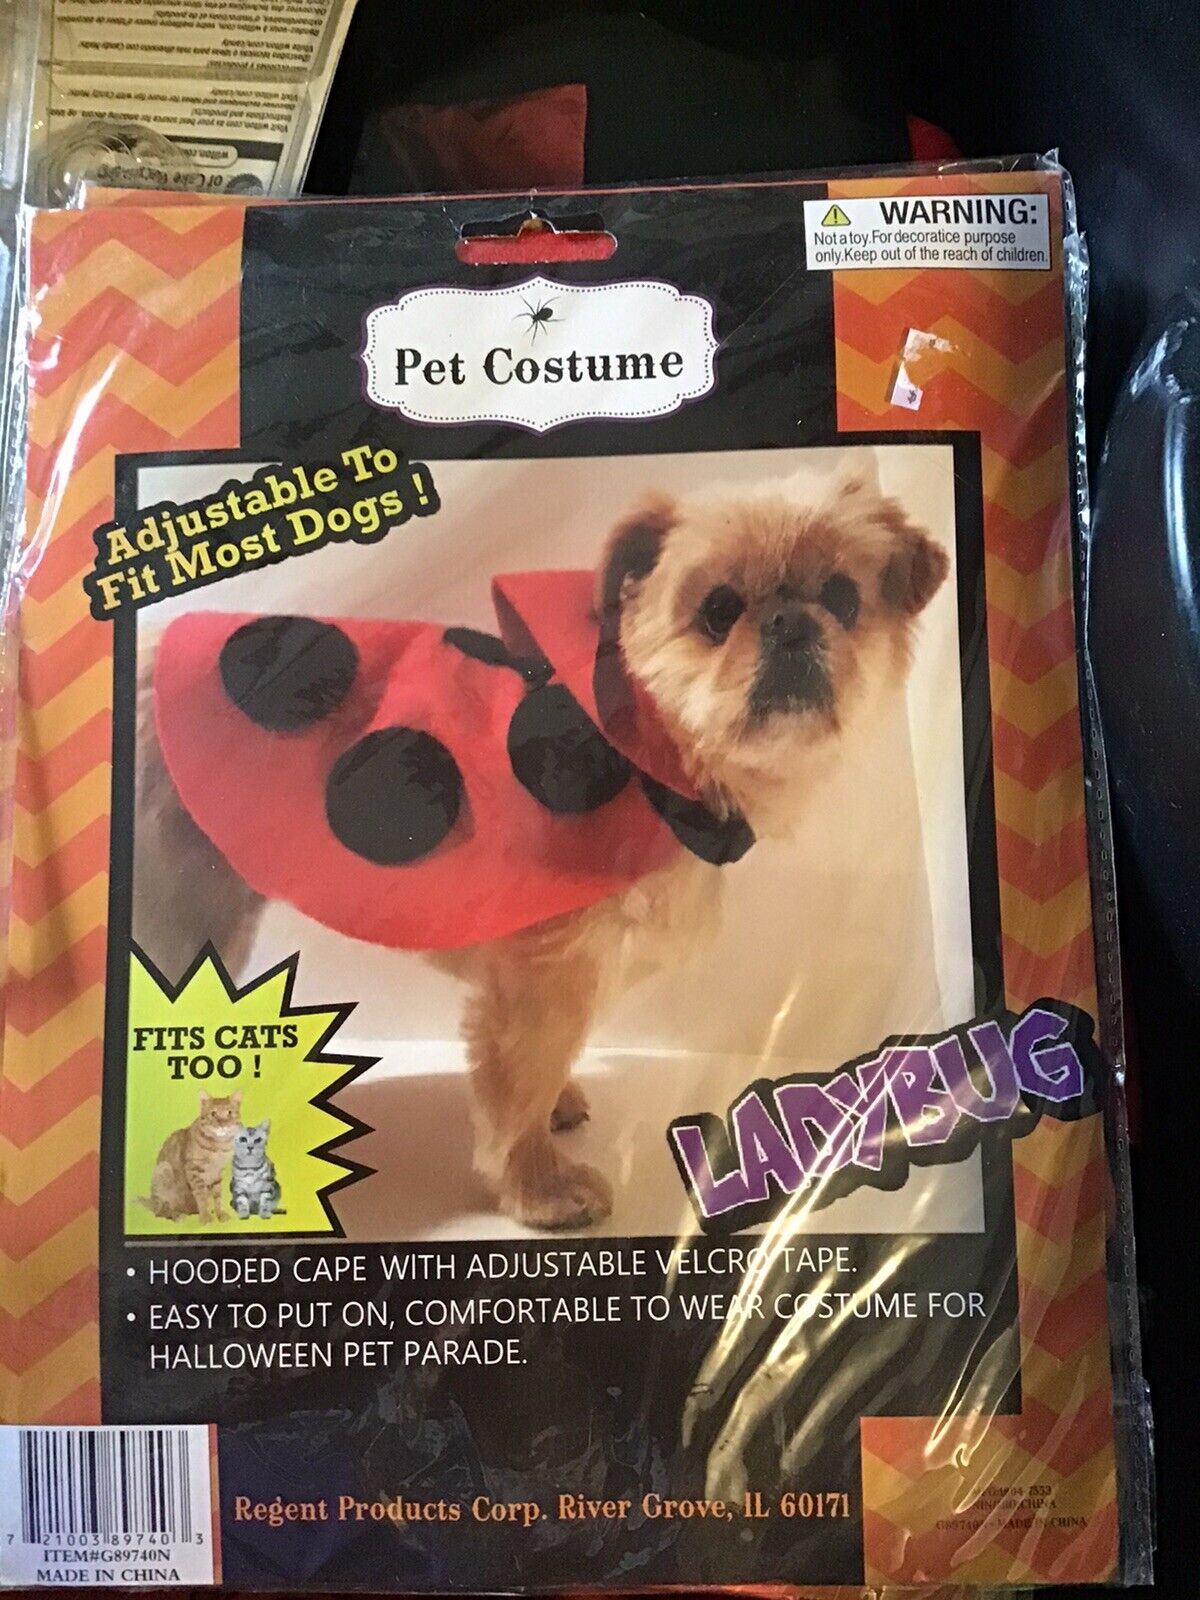 NEW HALLOWEEN TRICK OR TREAT PET COSTUME FOR DOGS & CATS LADYBUG